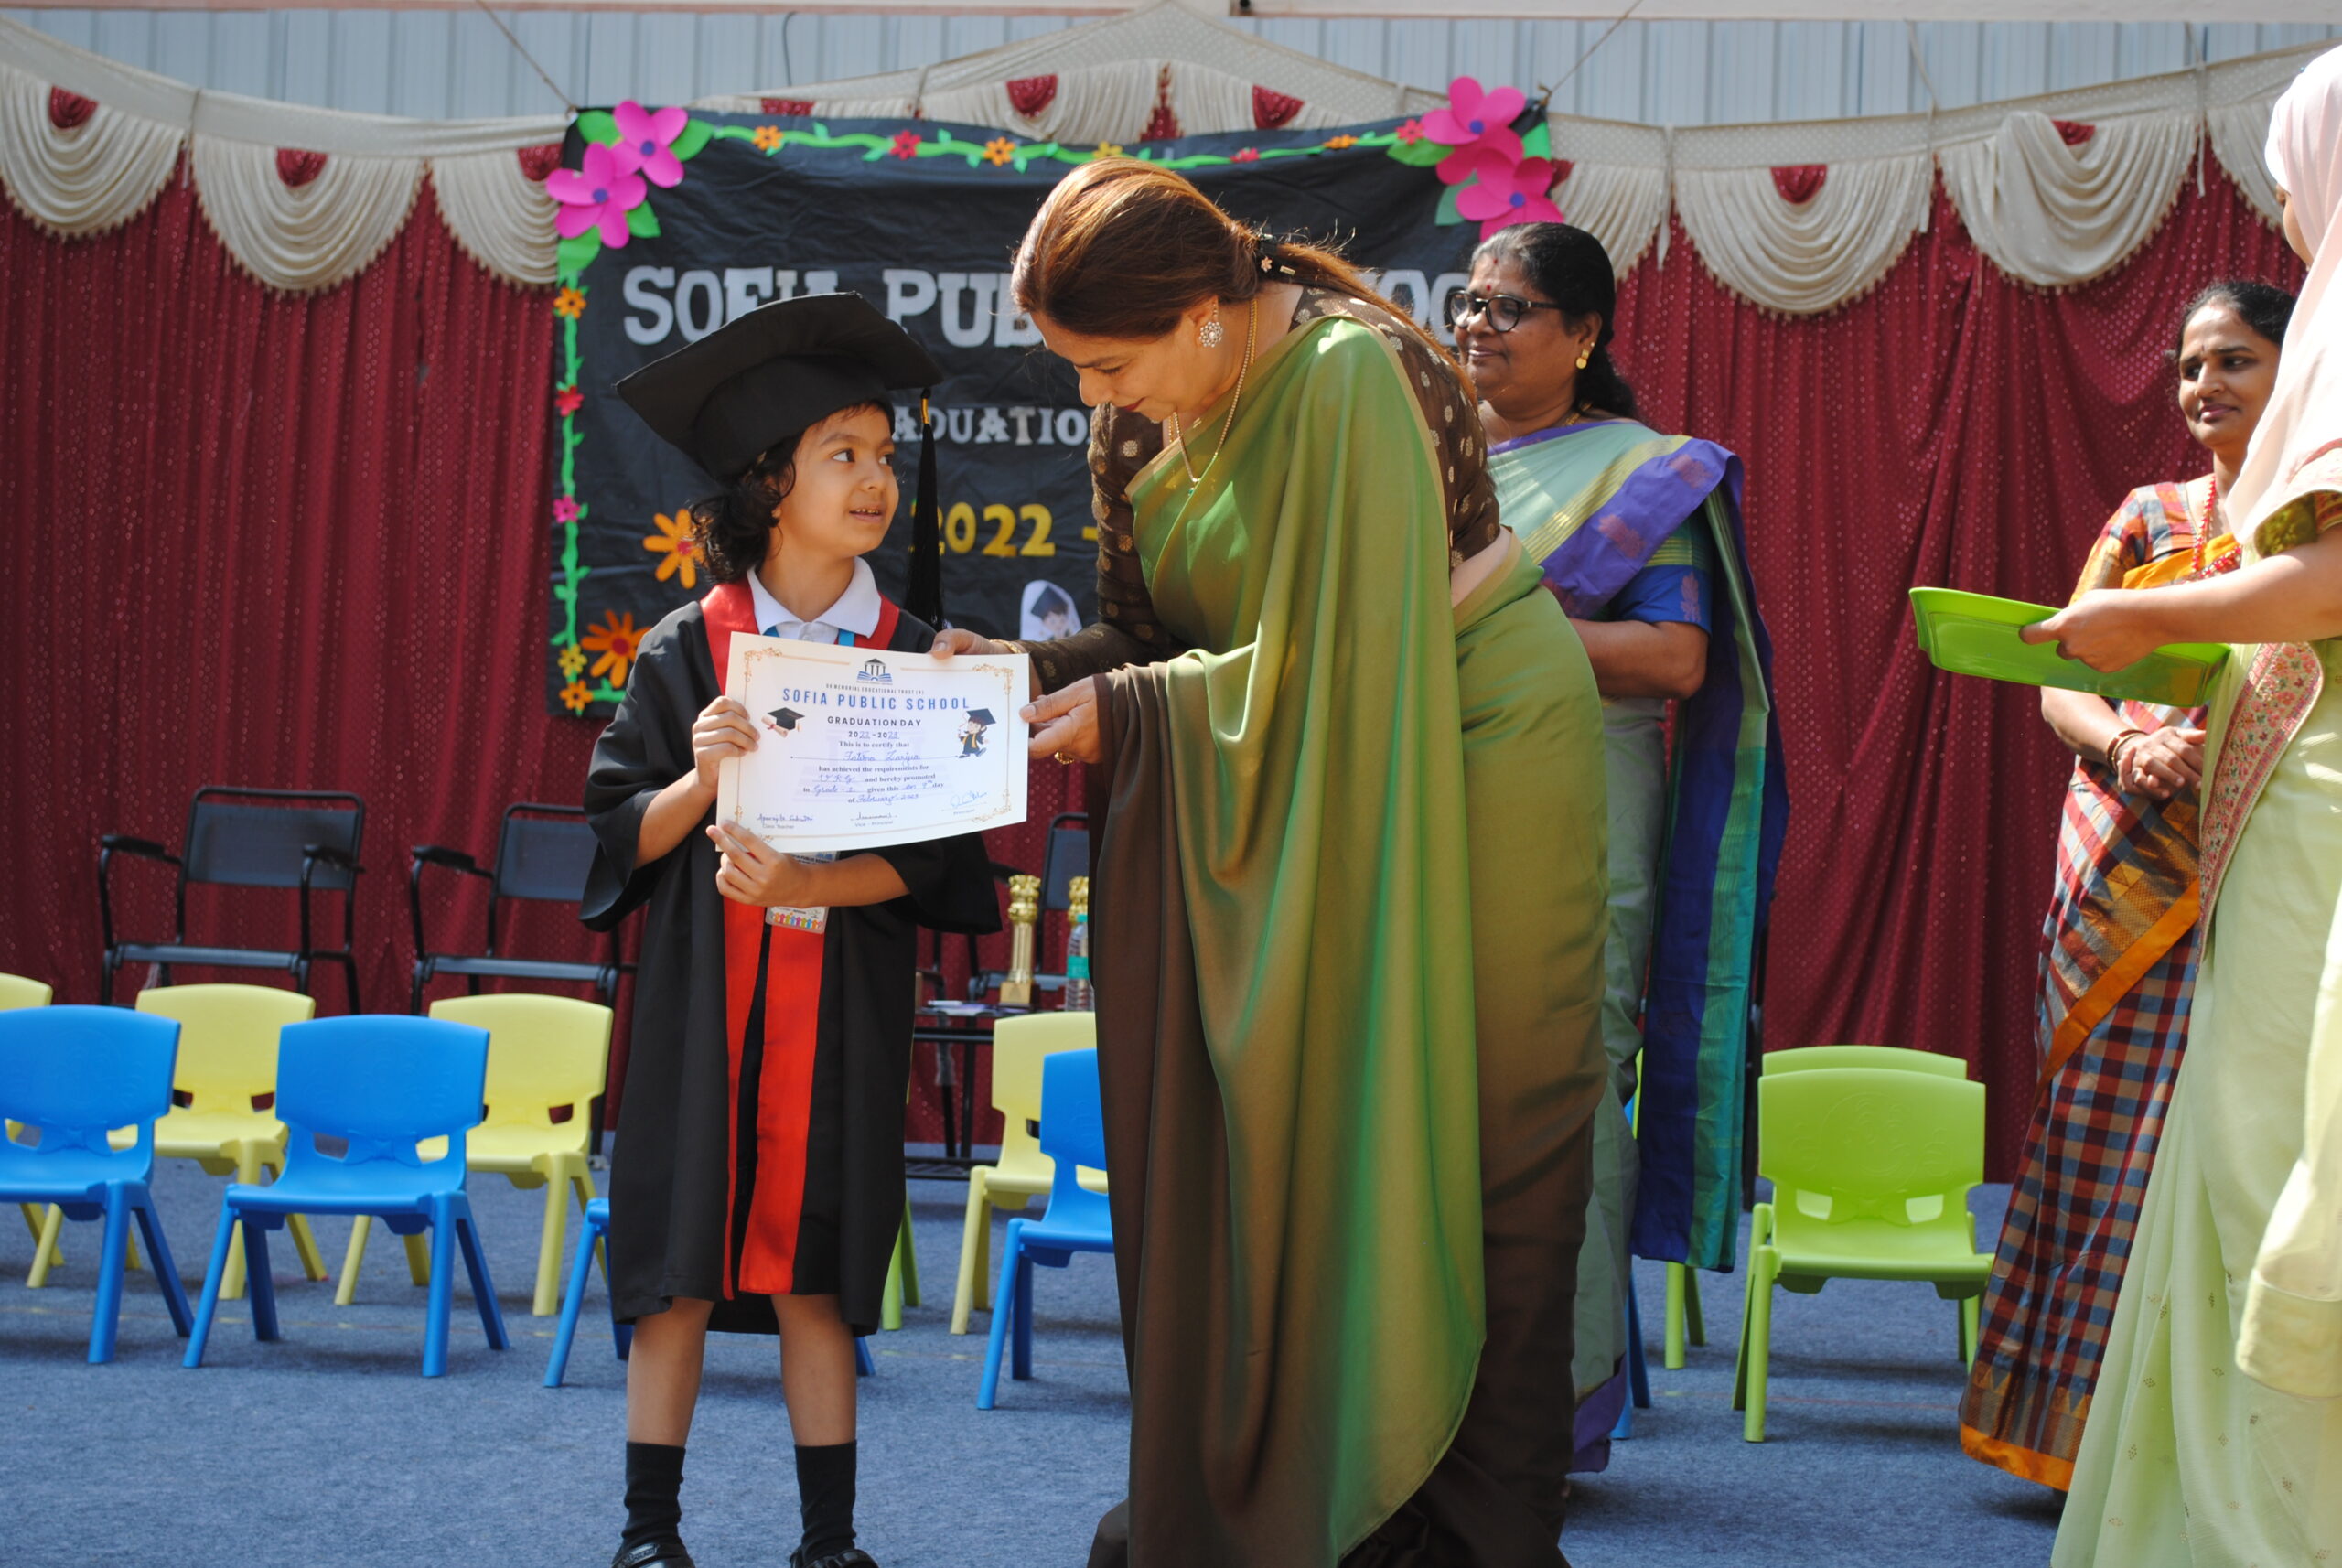 Child being given an award and praise for graduating class.